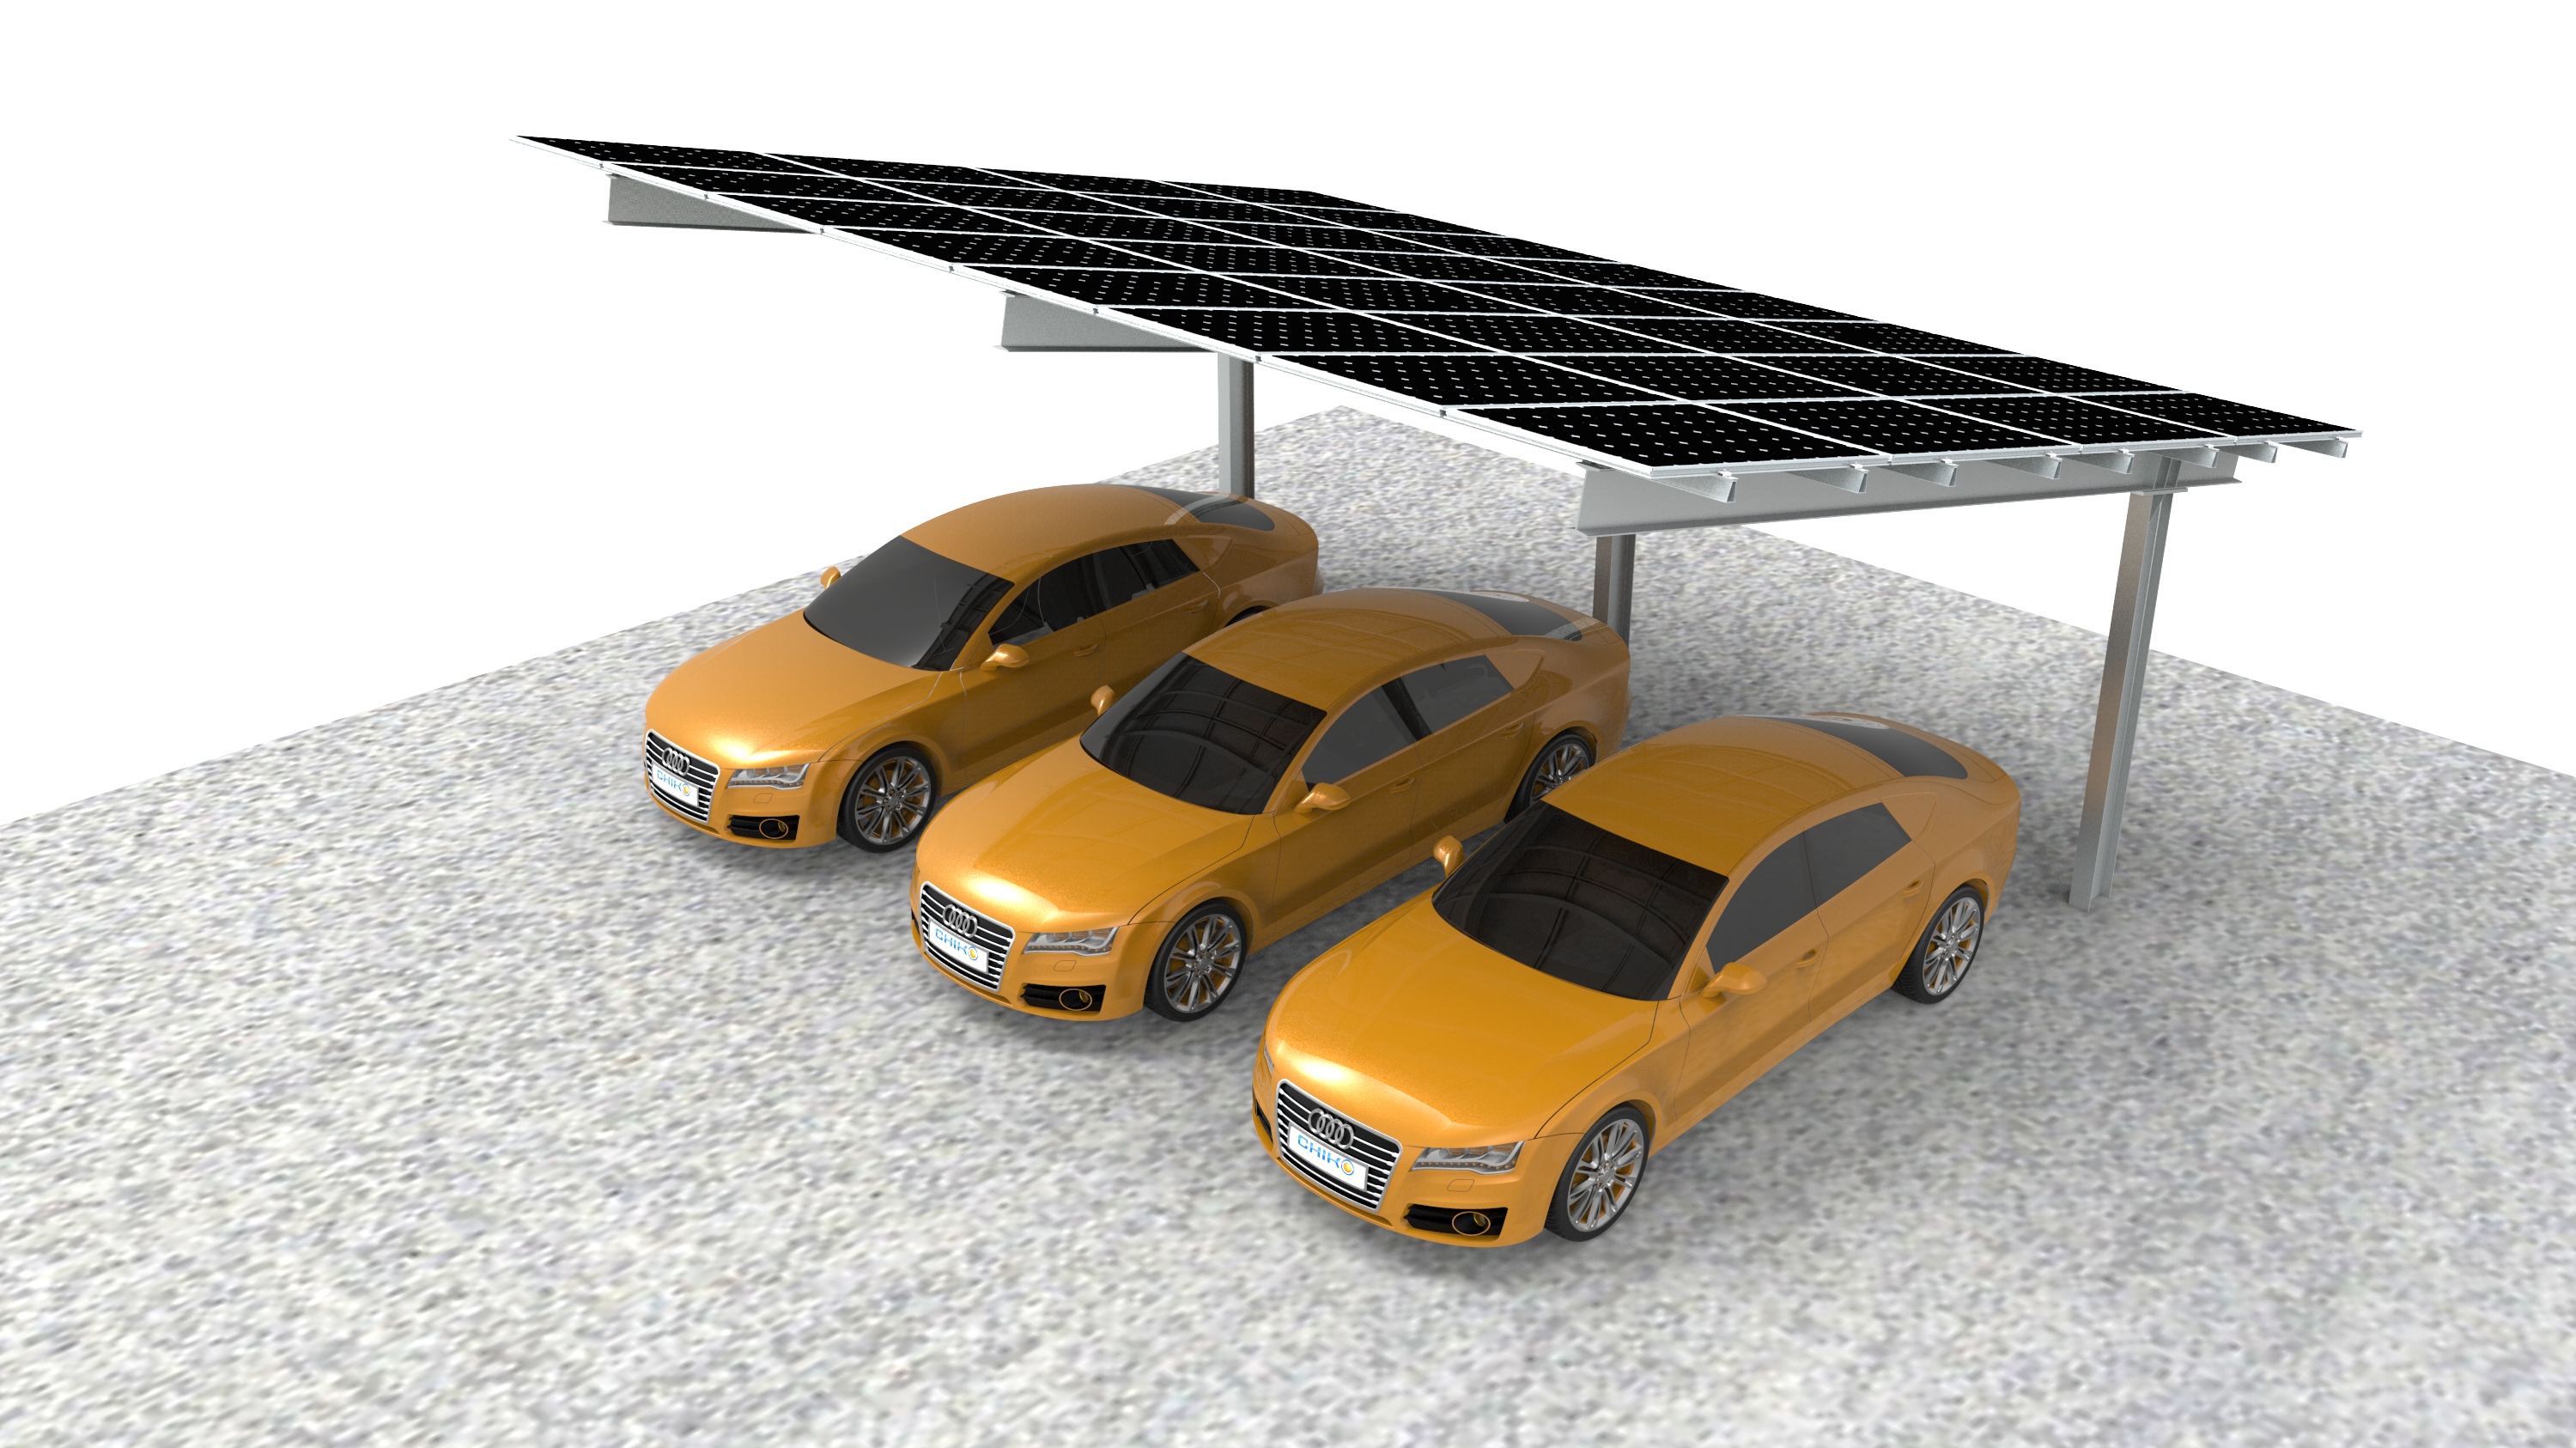 U S Solar Carport Market 2014 2018 Landscape Outlook And Leading Companies Chiko Solar Mounting System Mounting Factory Shanghai China Top Solar Mounting System